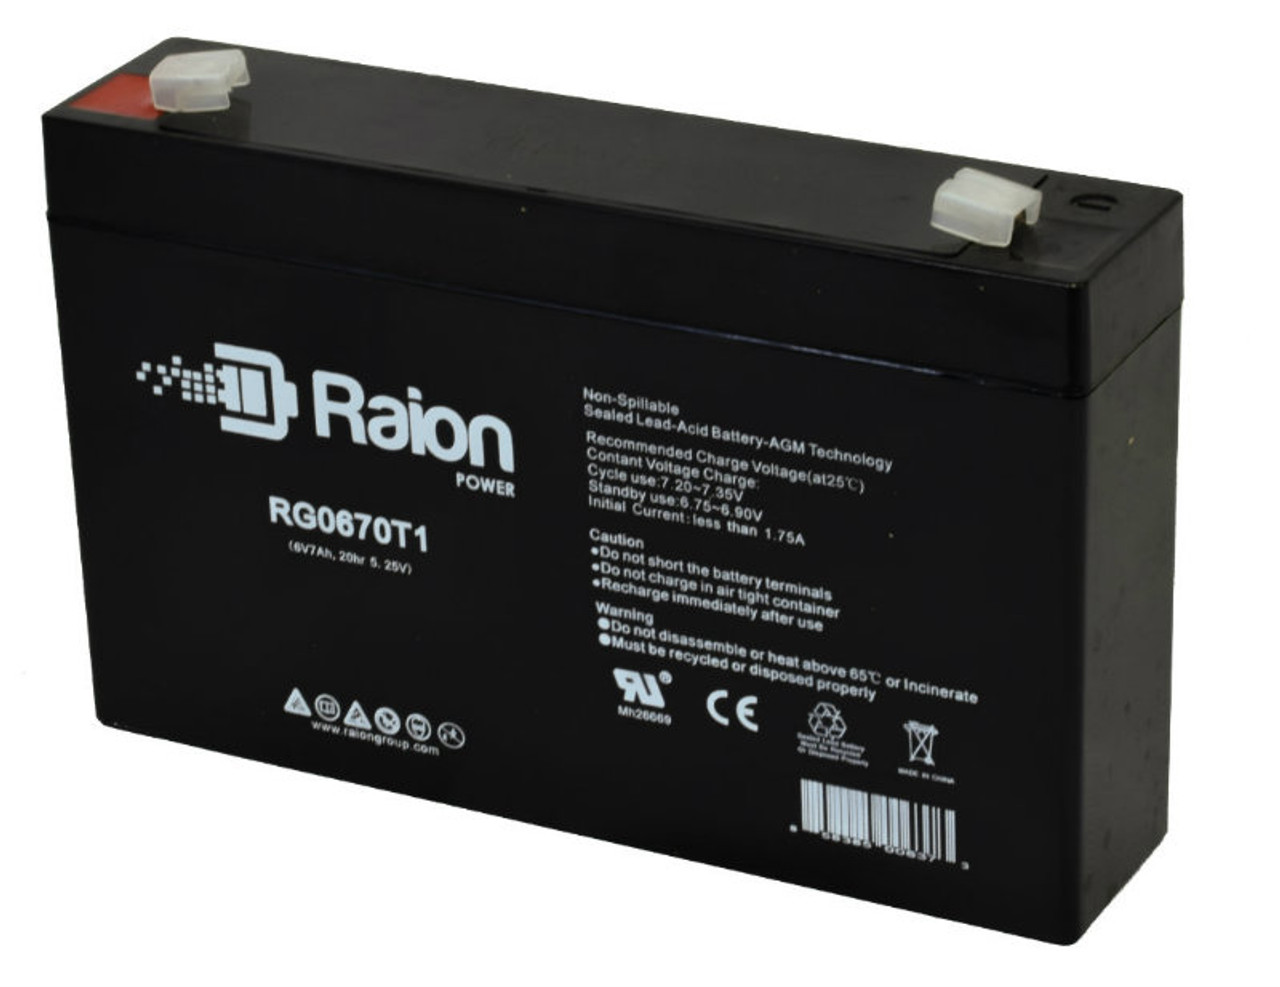 Raion Power 6V 7Ah Replacement Ride-On Toy Battery Cartridge for Aosom 370-113V80BU 6V Volkswagen Beetle Car Toy